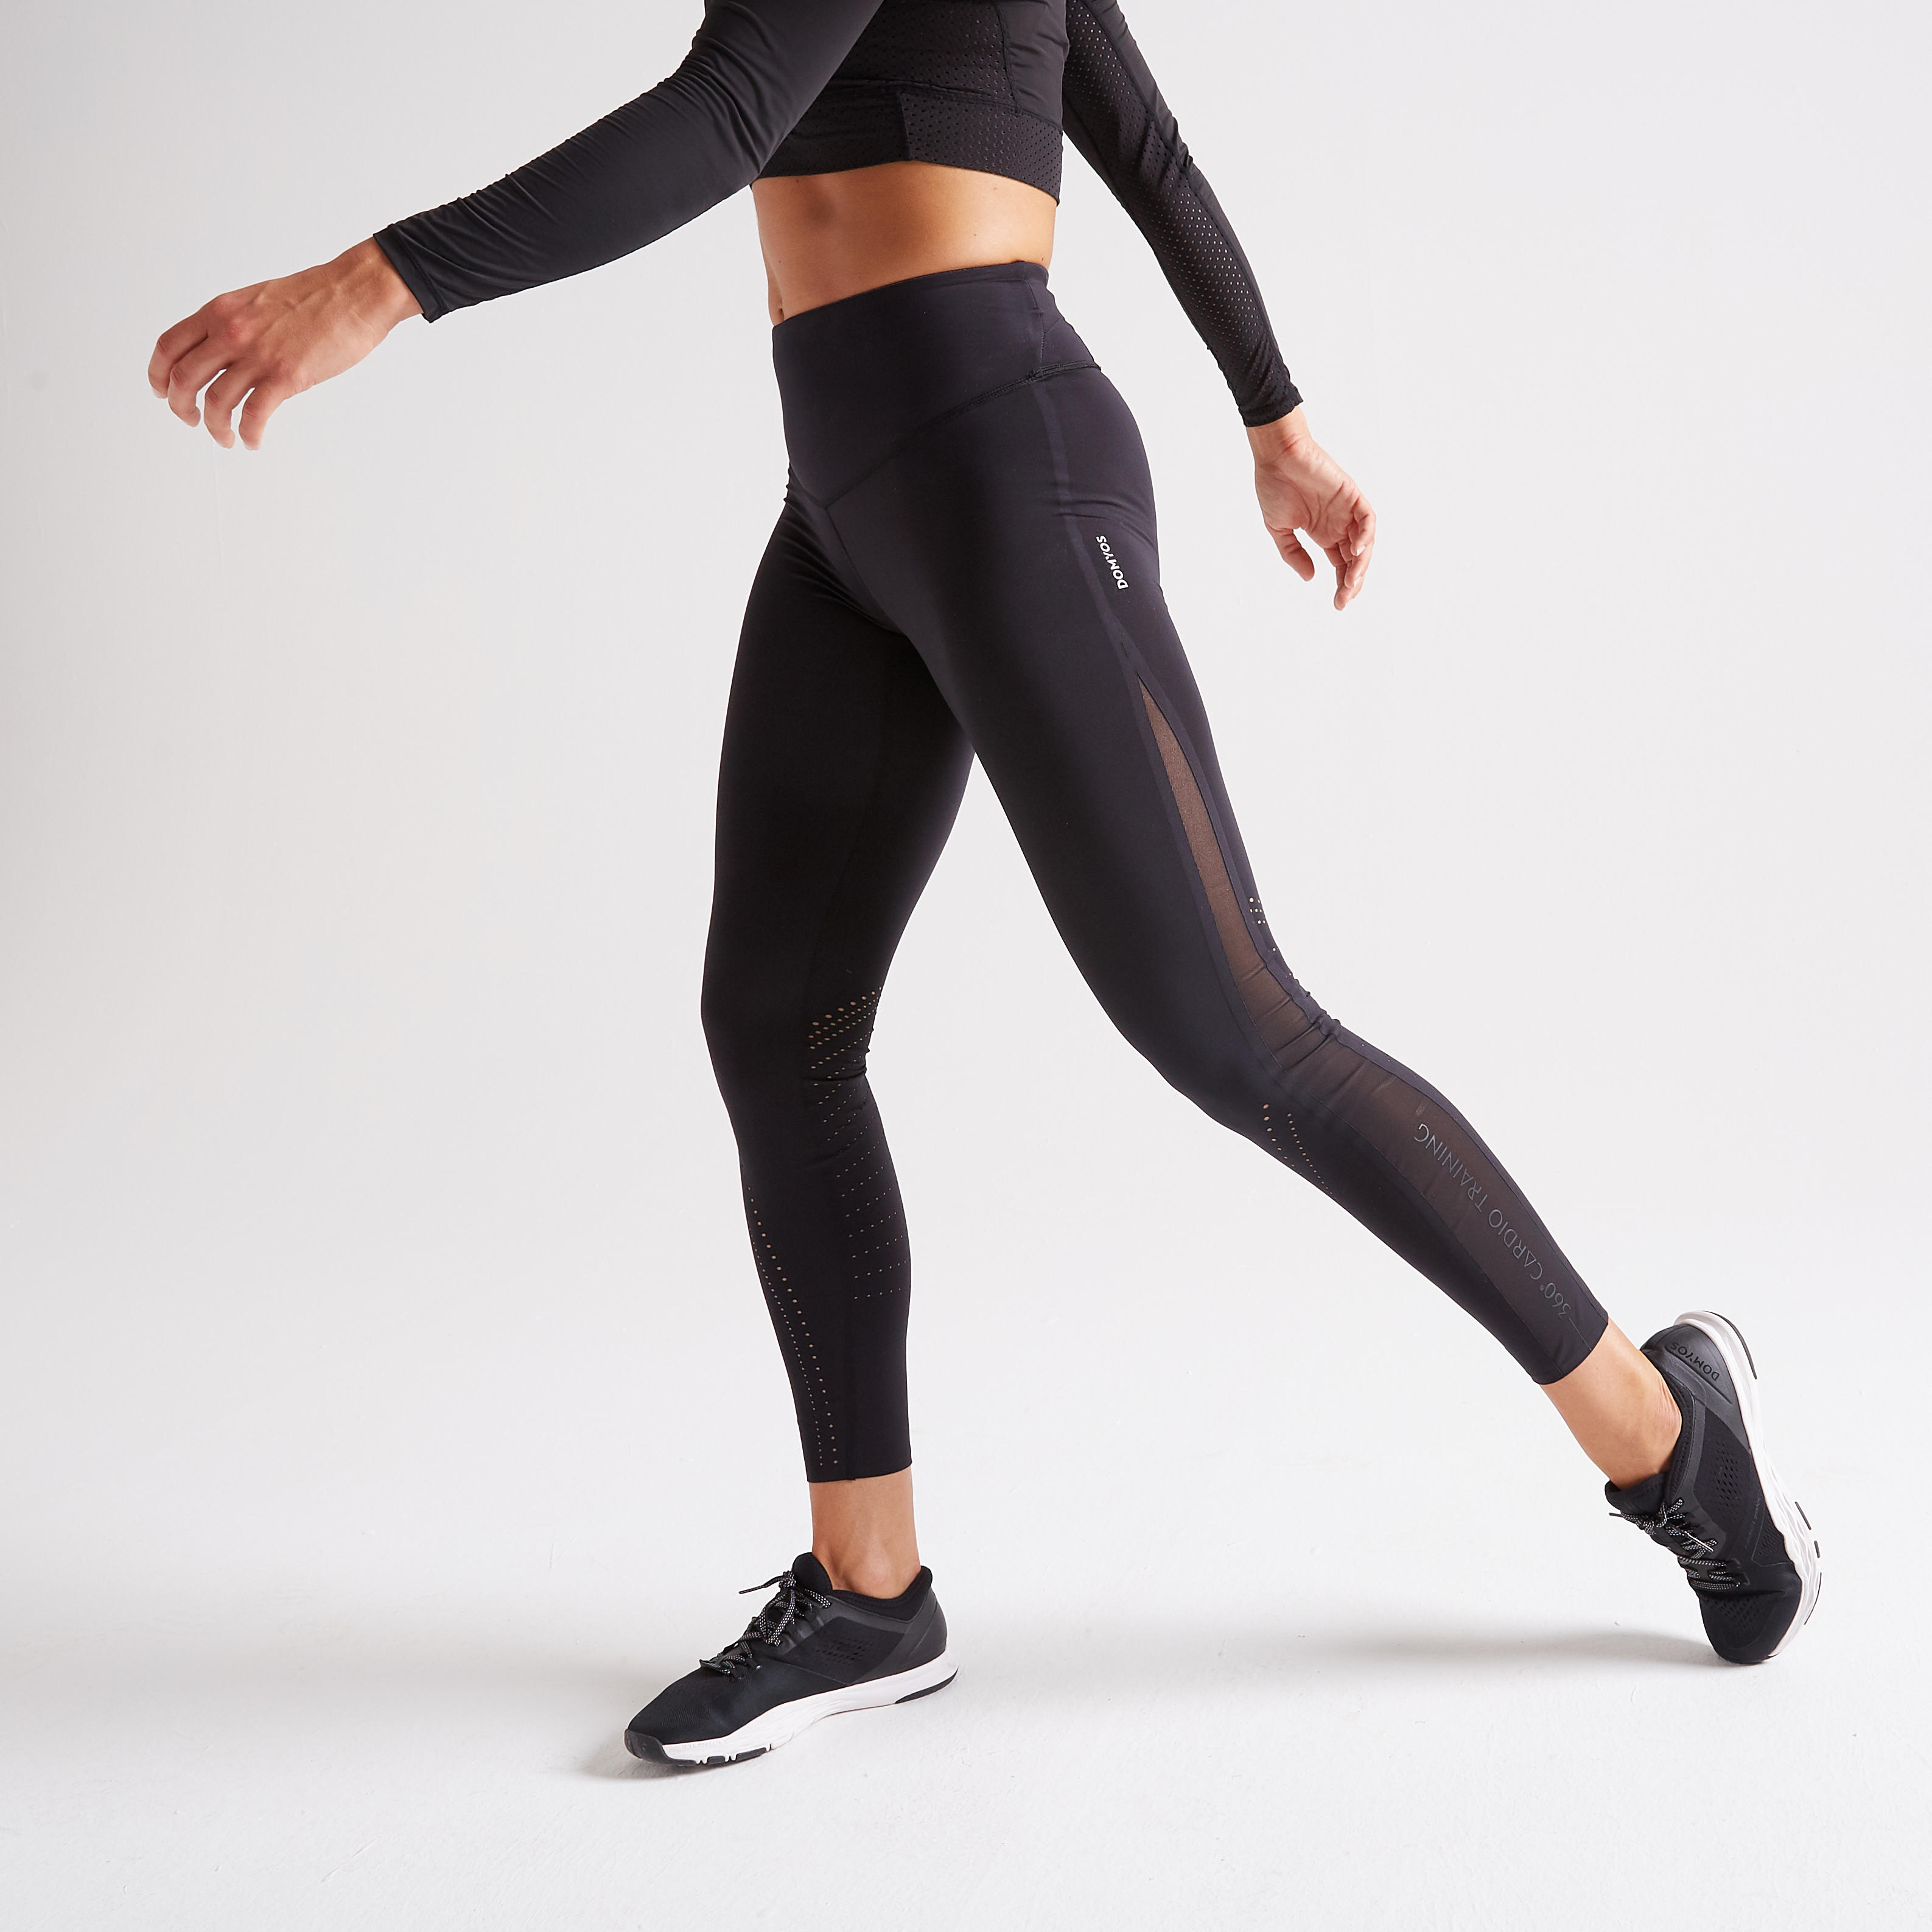 Womens Gym Wear - Buy Workout Clothes for Women Online at Best Prices in  India | Flipkart.com